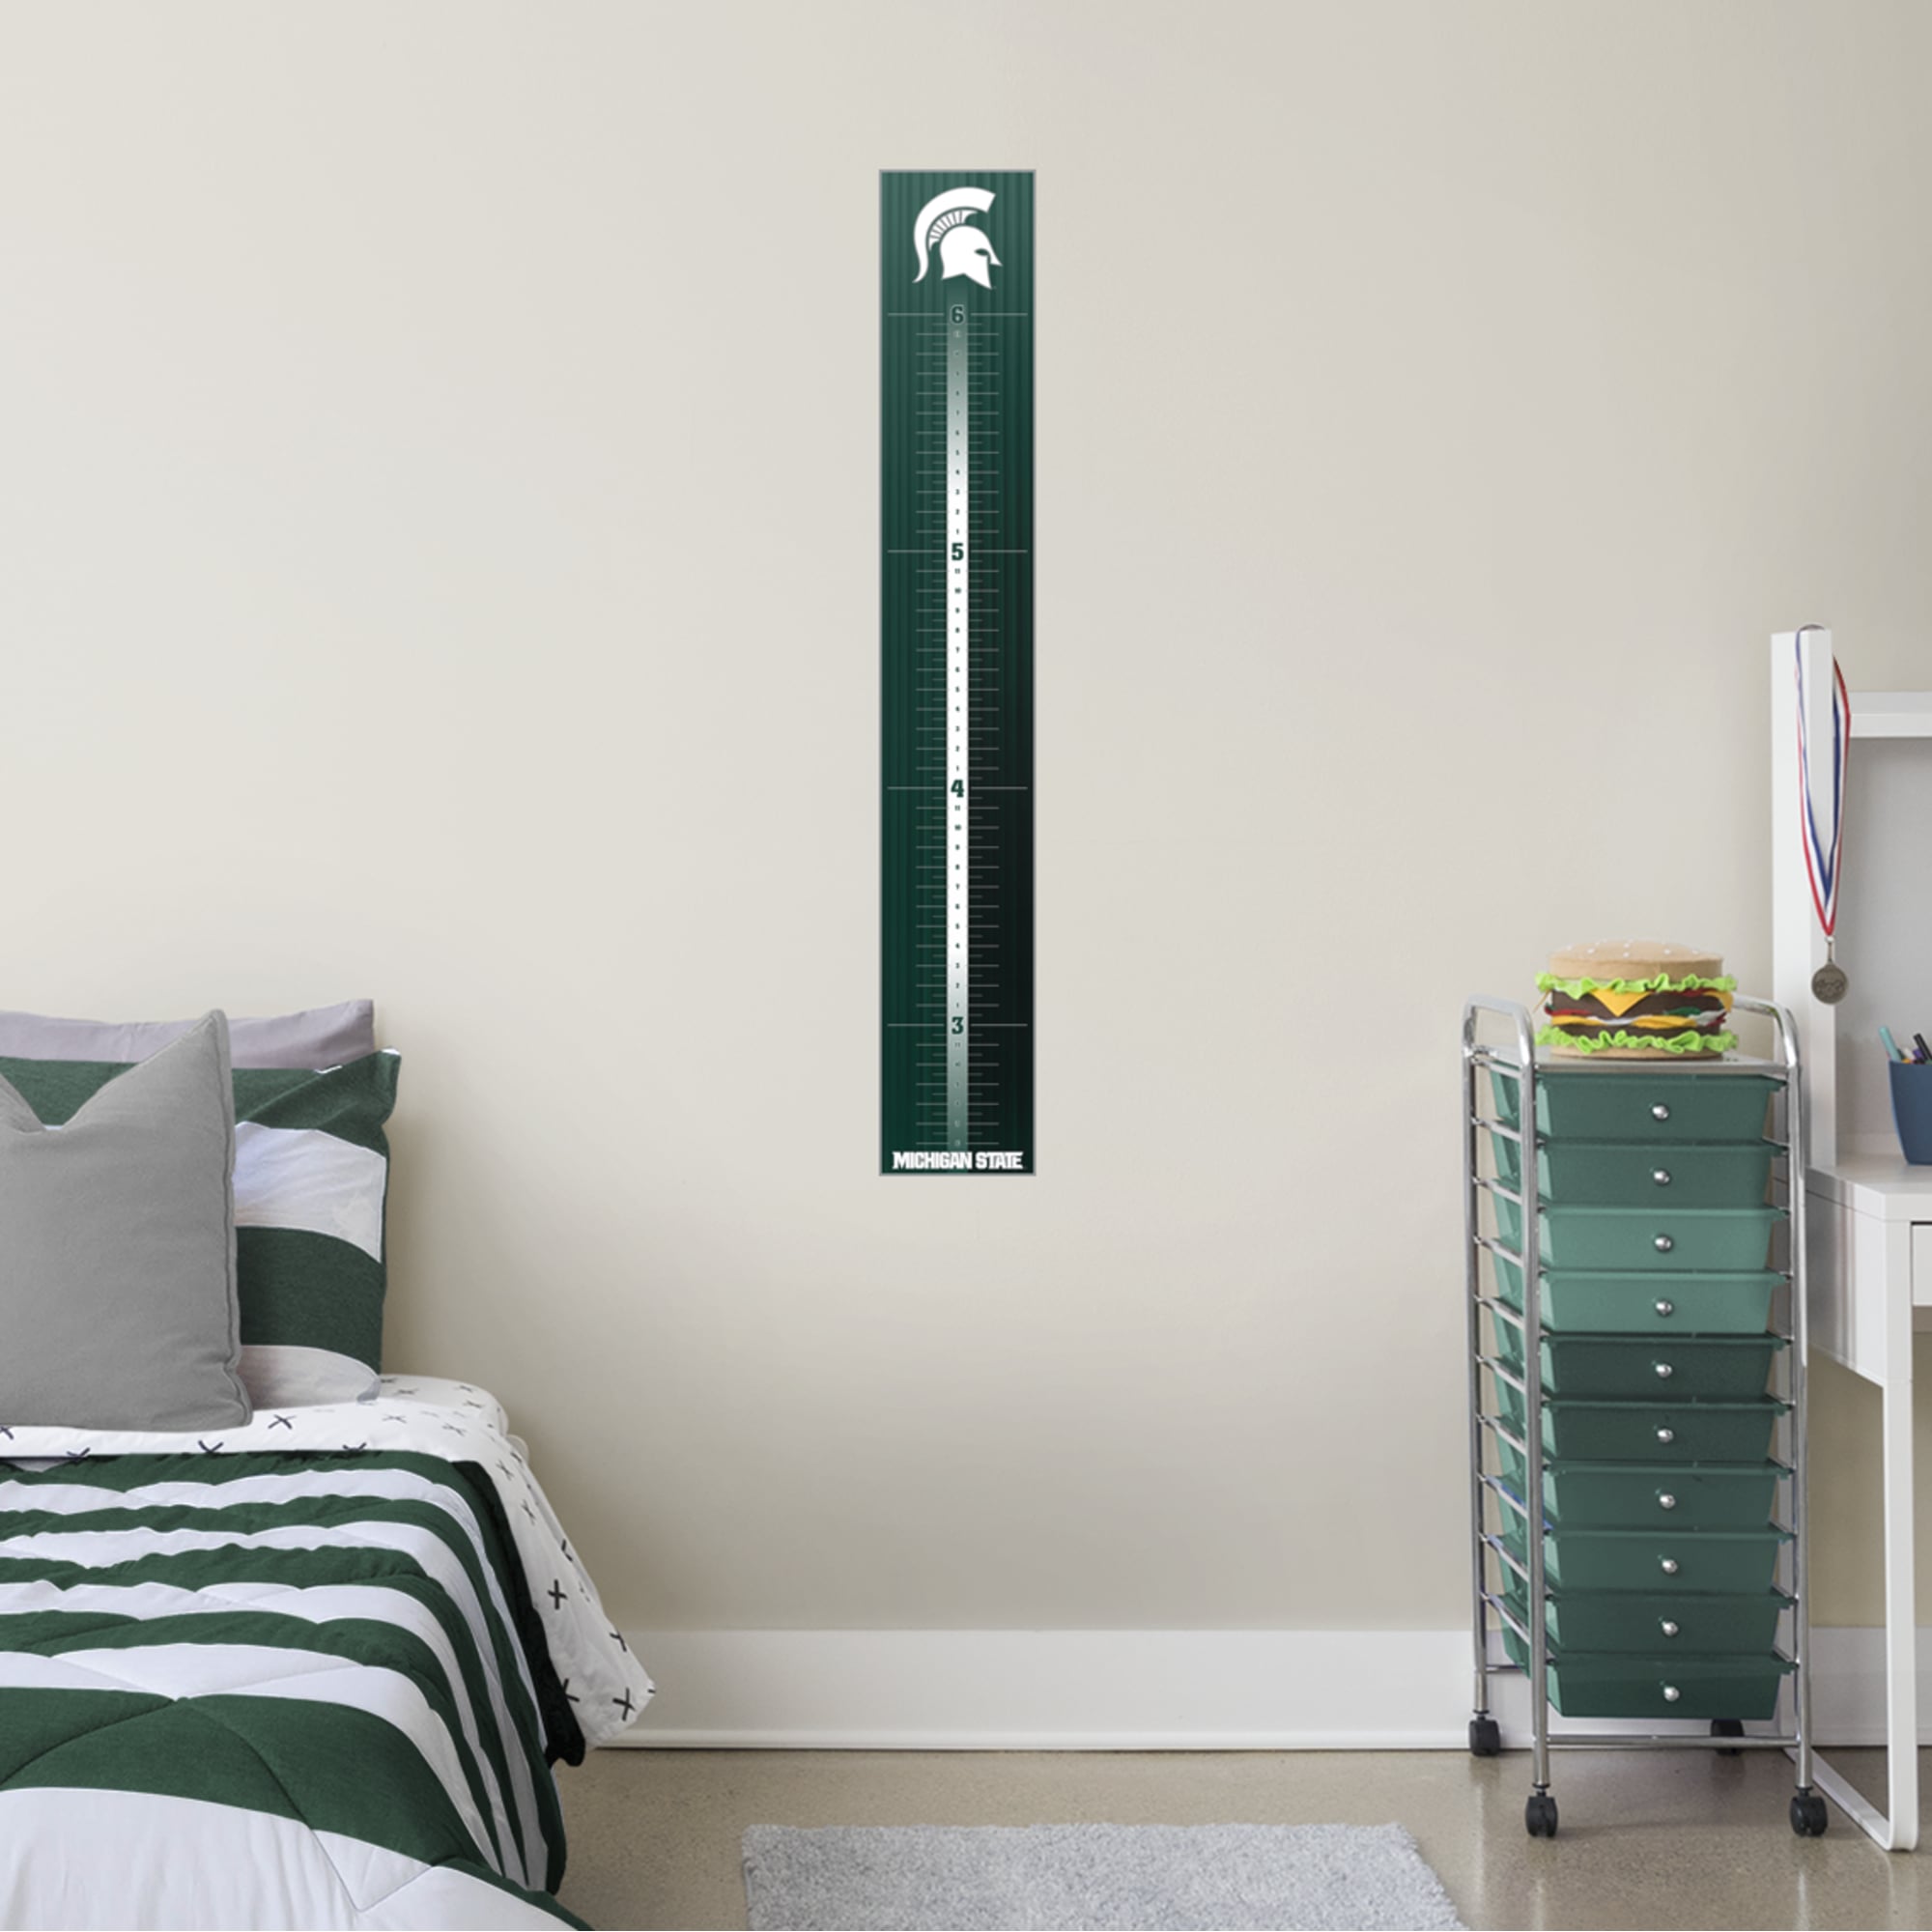 Michigan State Spartans: Logo Growth Chart - Officially Licensed Removable Wall Decal 8.0"W x 51.0"H by Fathead | Vinyl